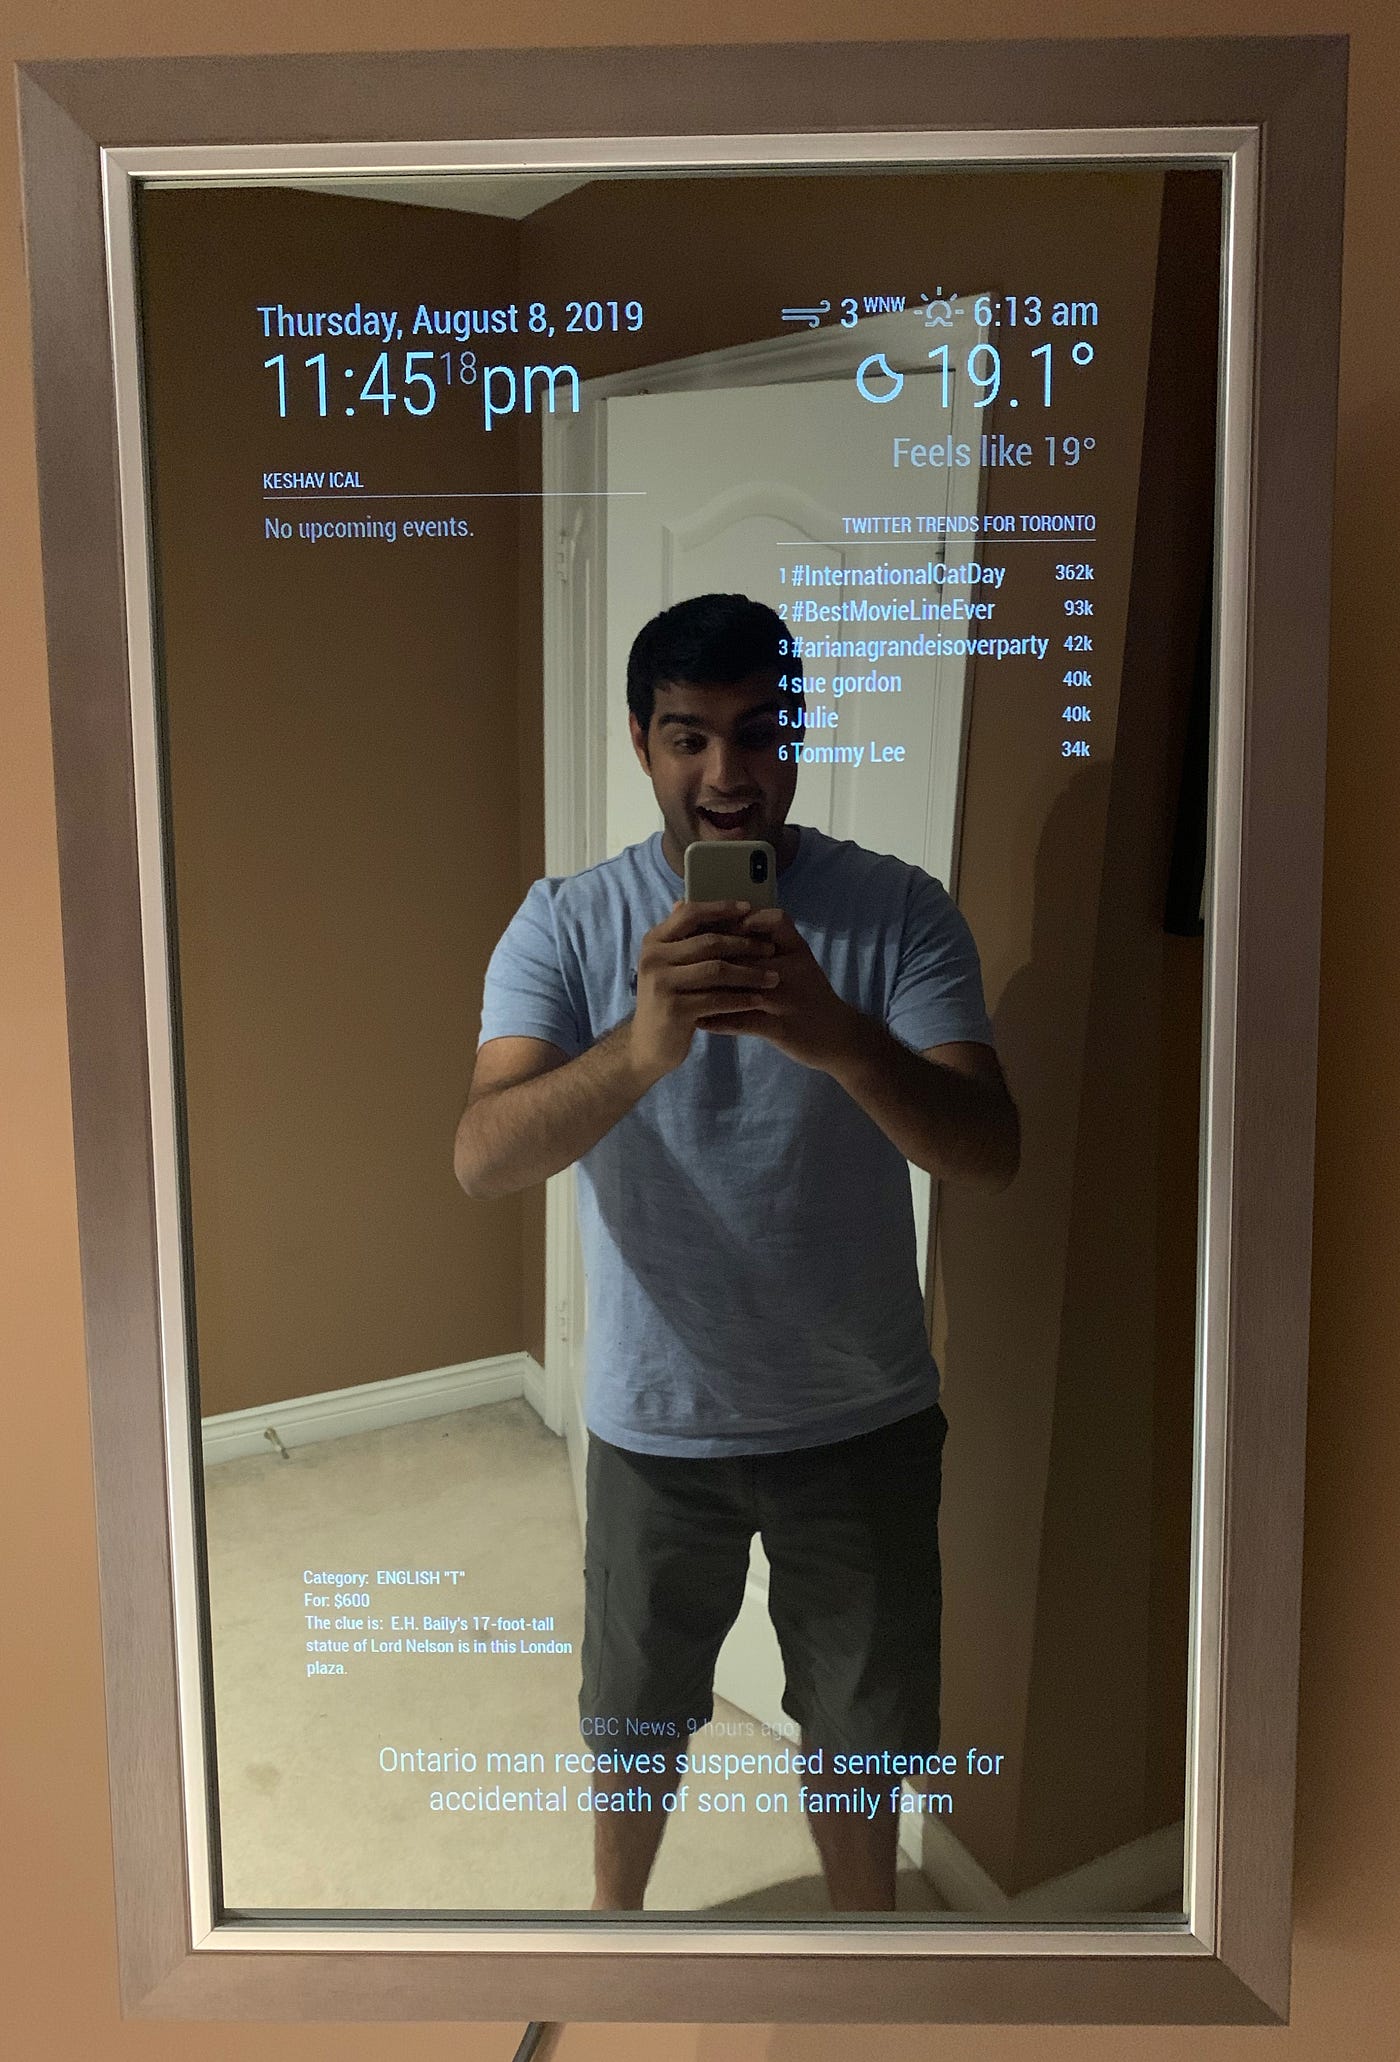 A Step by Step Guide to Build your own Smart Mirror, by Keshav Chawla